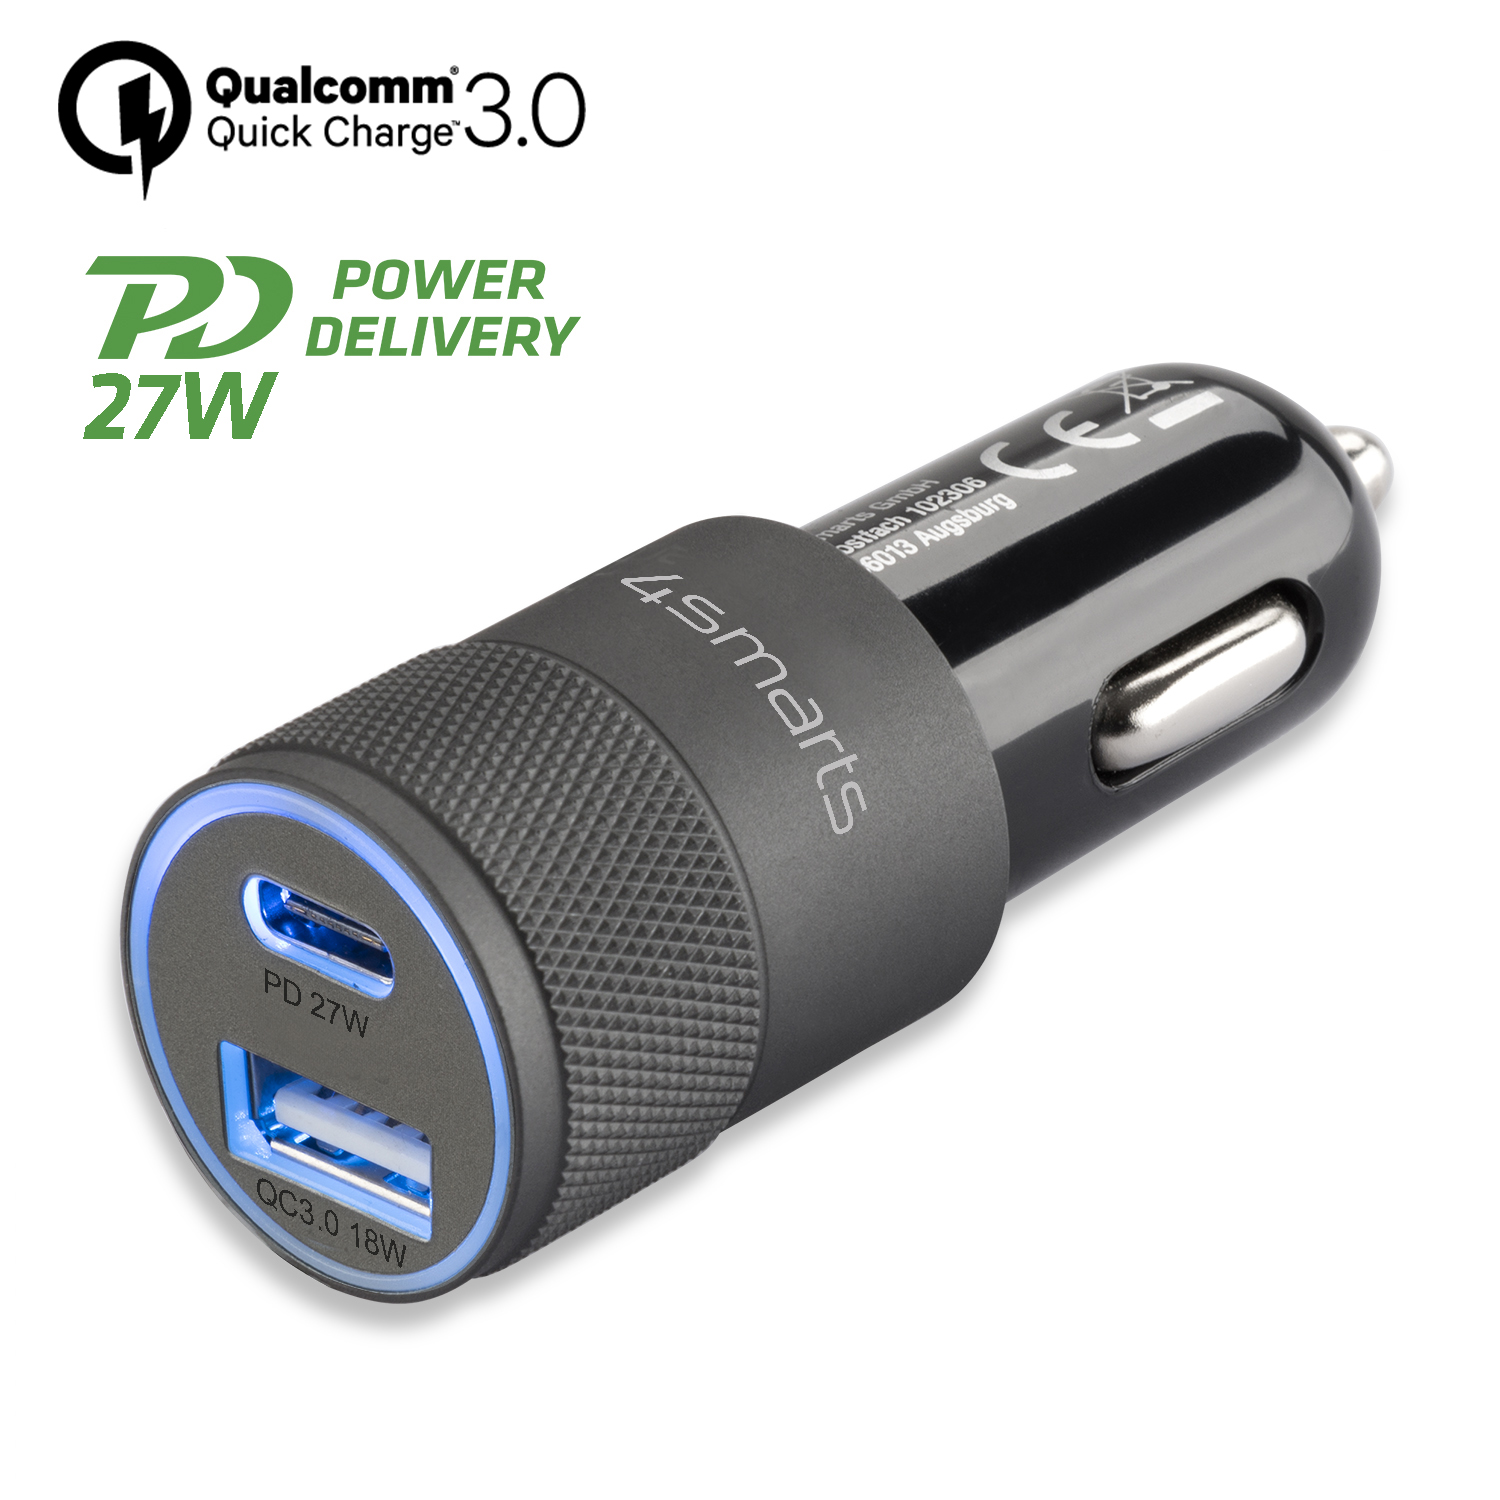 Quick Charge Rapid+ Adapter 27W mit PD 4SMARTS